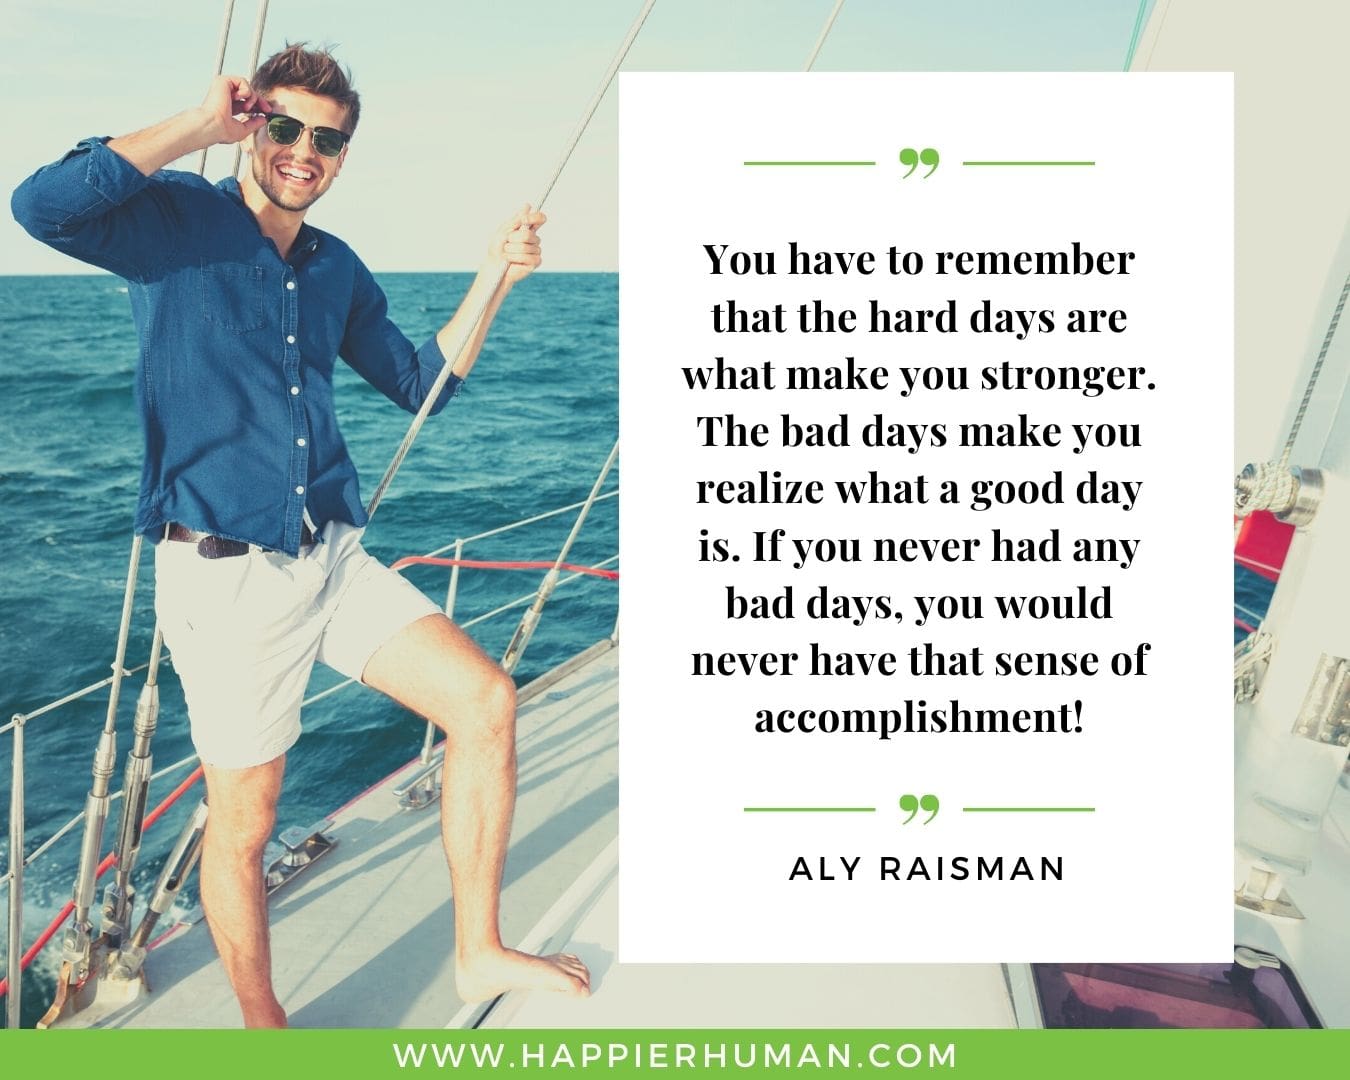 Great Day Quotes - “You have to remember that the hard days are what make you stronger. The bad days make you realize what a good day is. If you never had any bad days, you would never have that sense of accomplishment!” – Aly Raisman